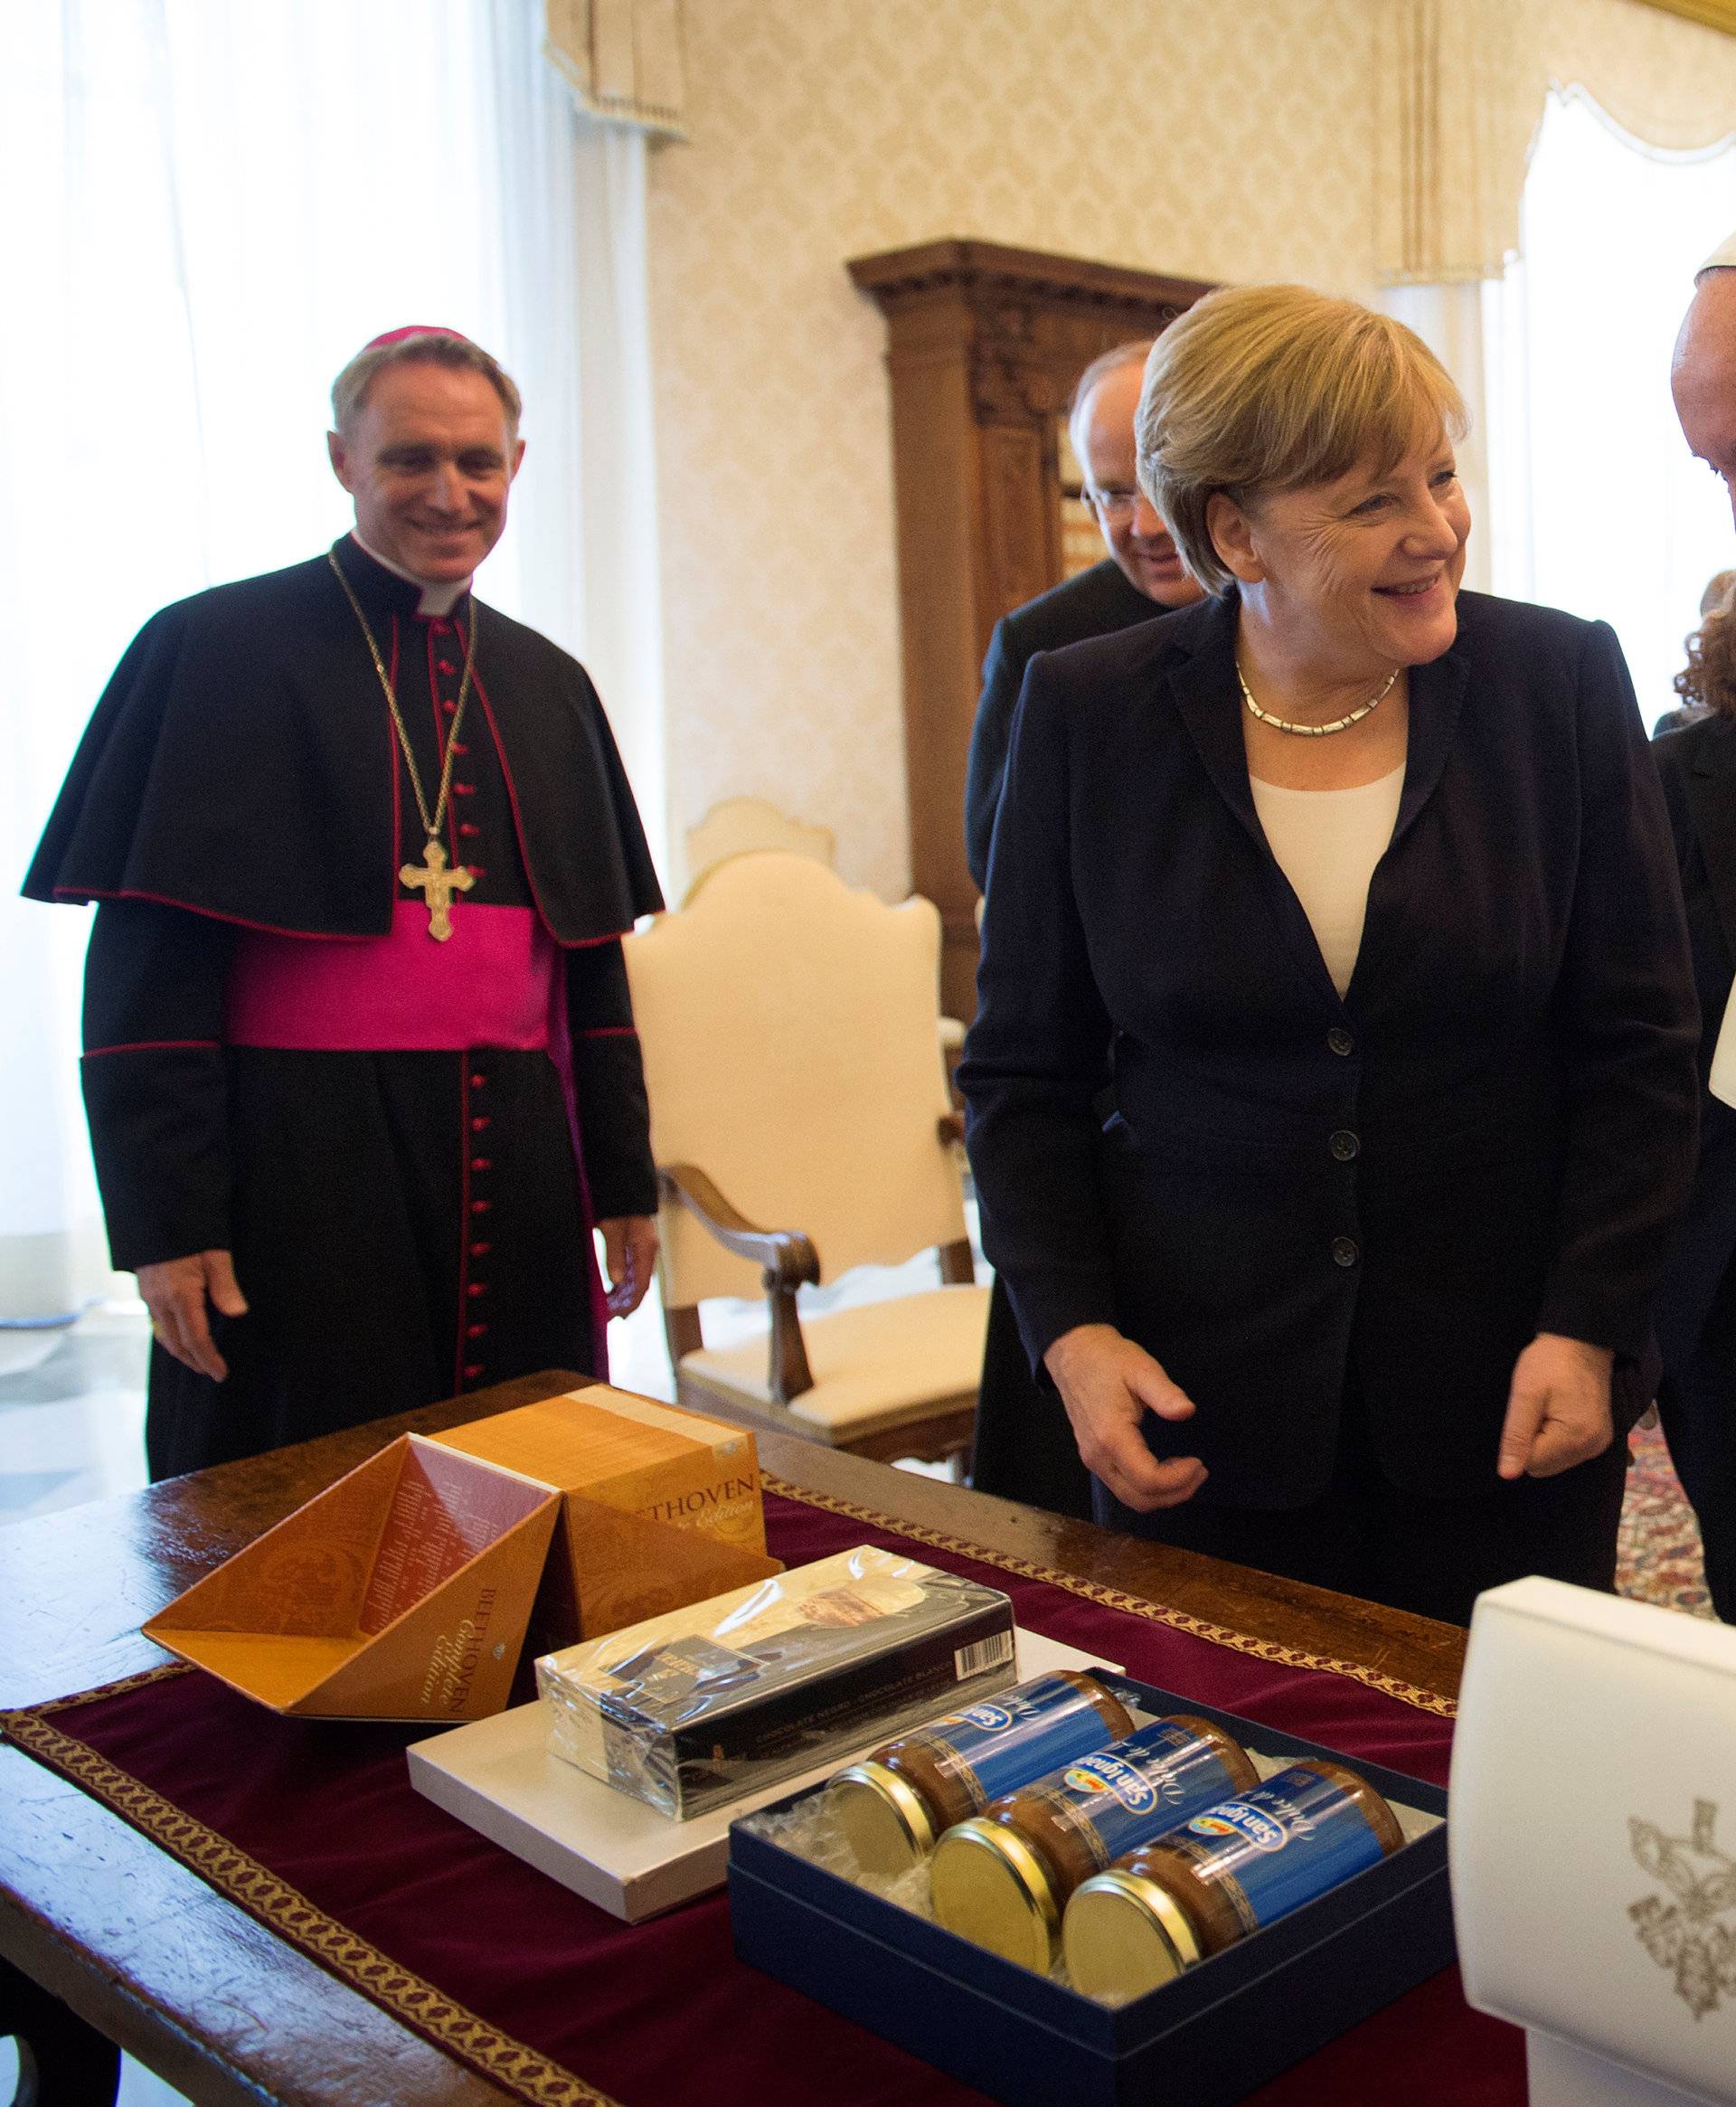 German Chancellor Angela Merkel and Pope Francis exchange gifts during a meeting at the Vatican